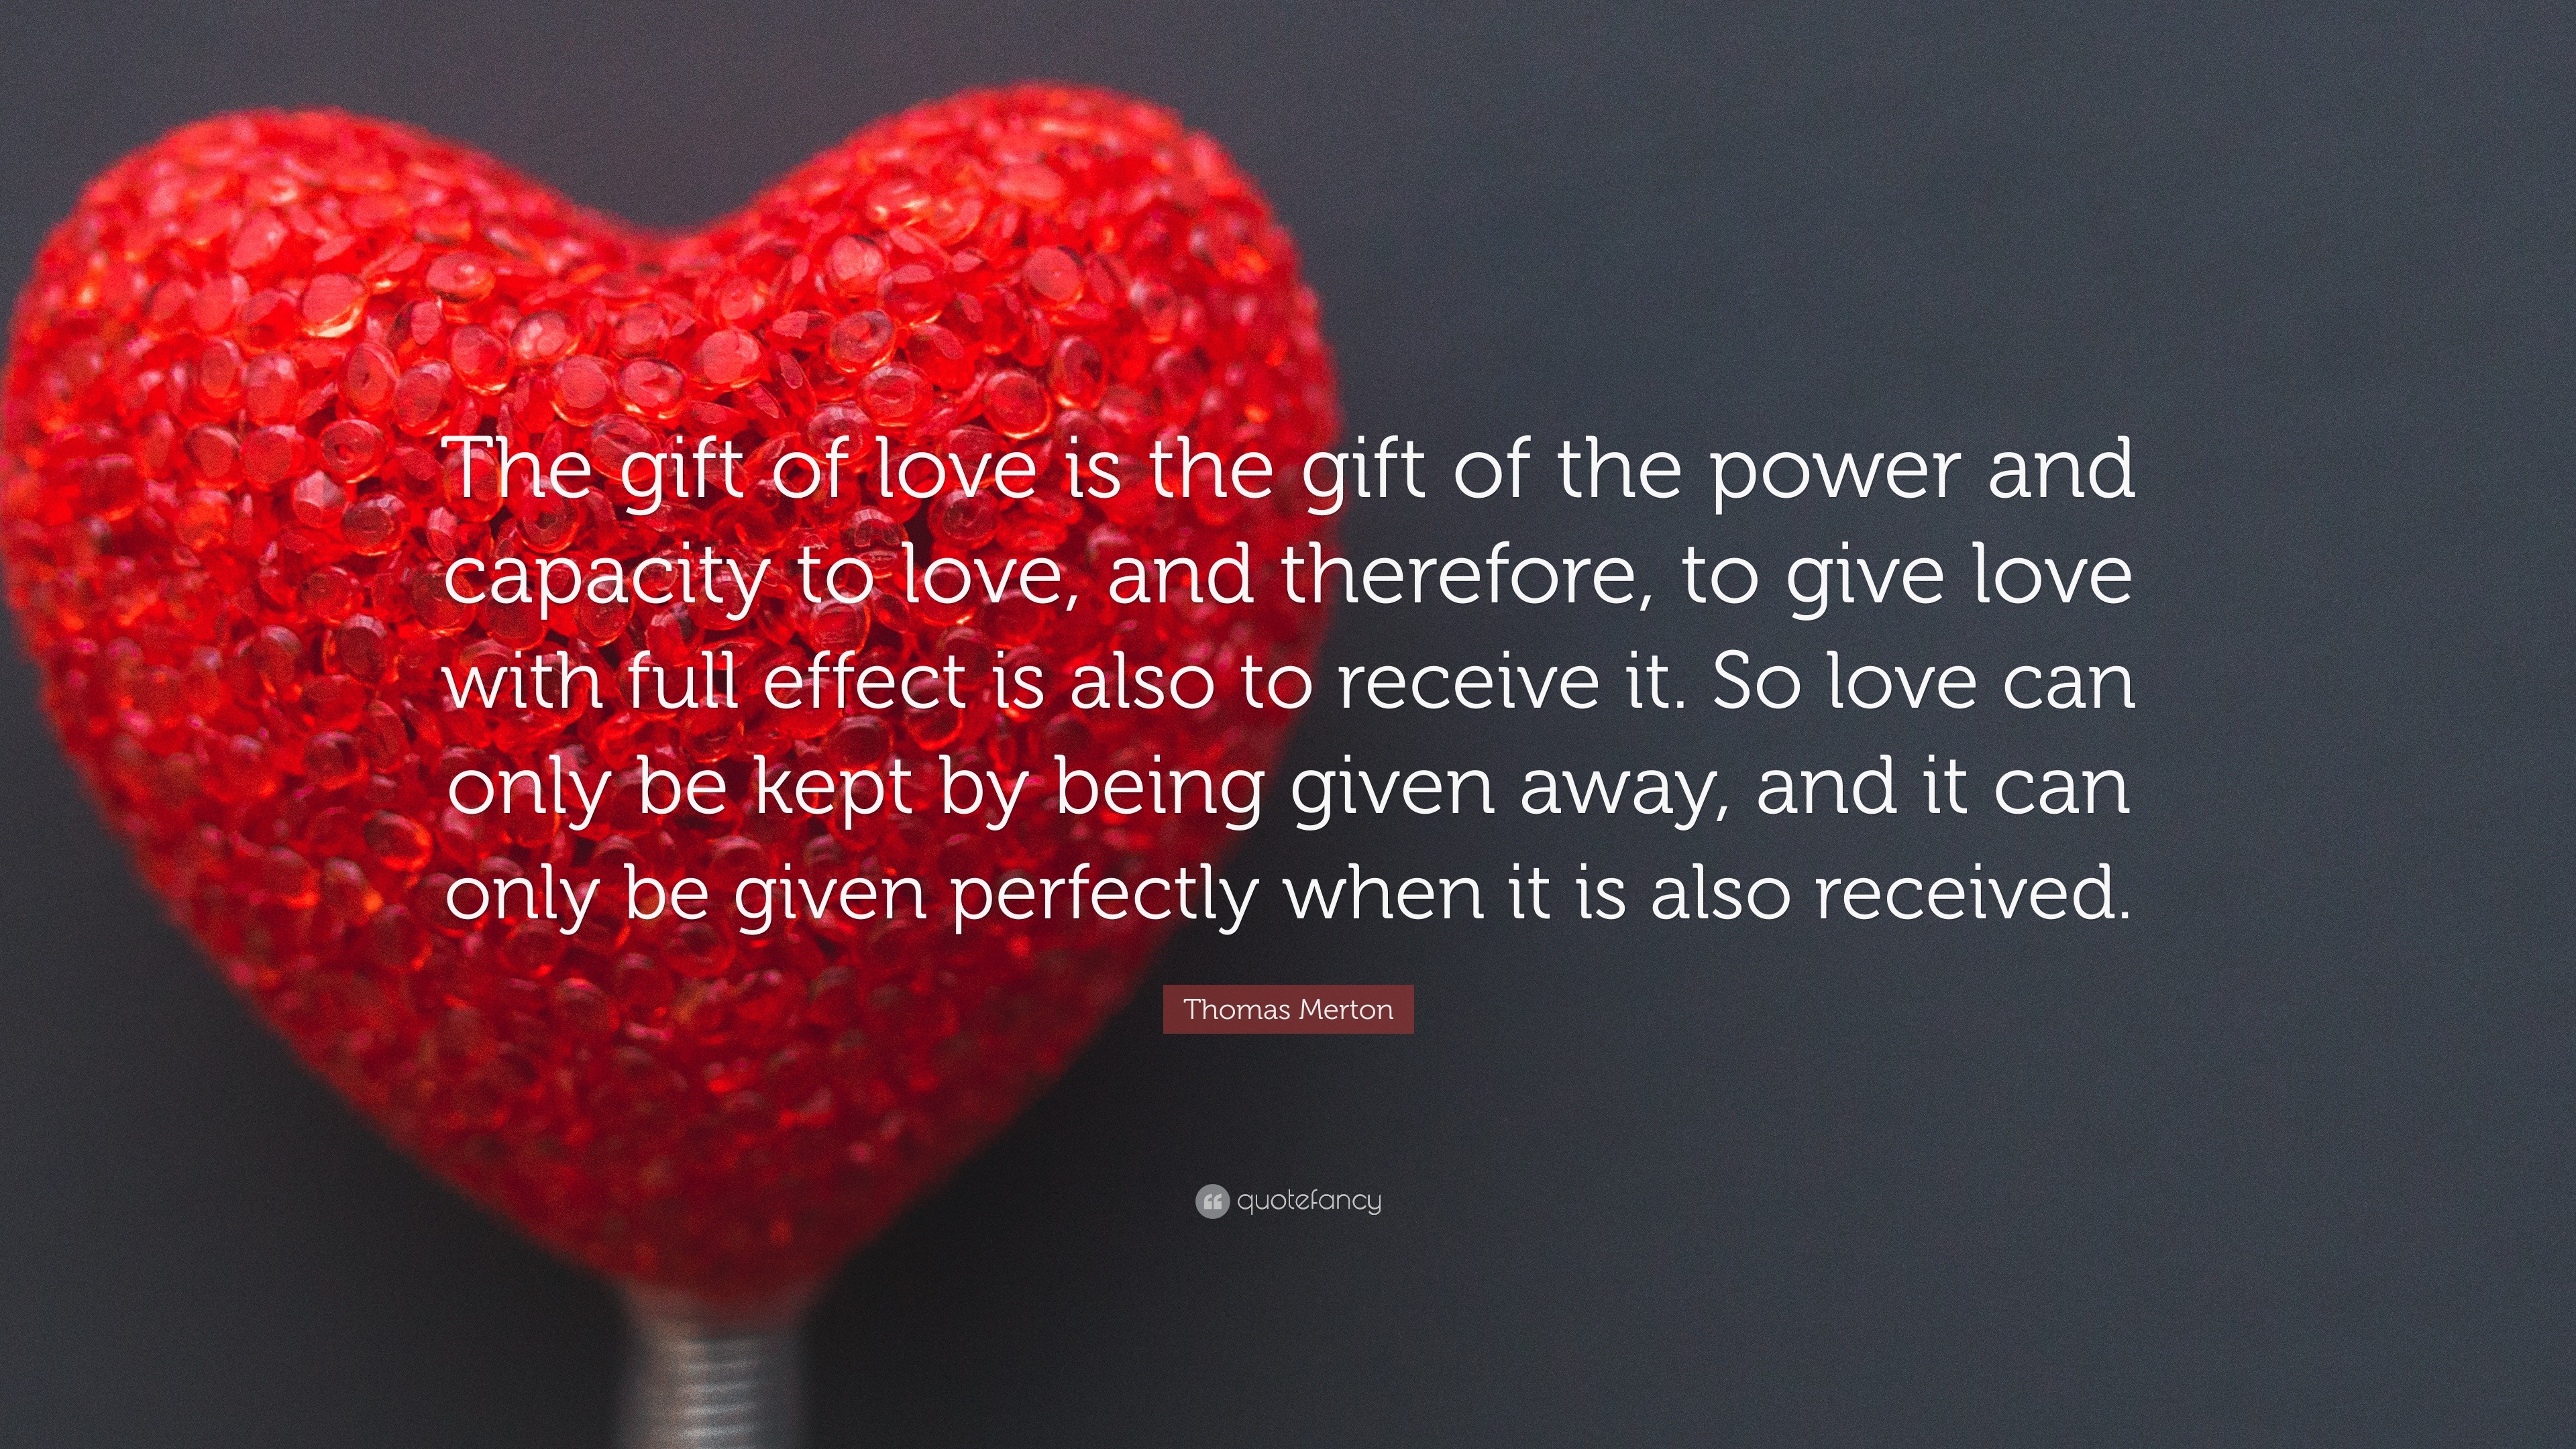 https://quotefancy.com/media/wallpaper/3840x2160/174064-Thomas-Merton-Quote-The-gift-of-love-is-the-gift-of-the-power-and.jpg